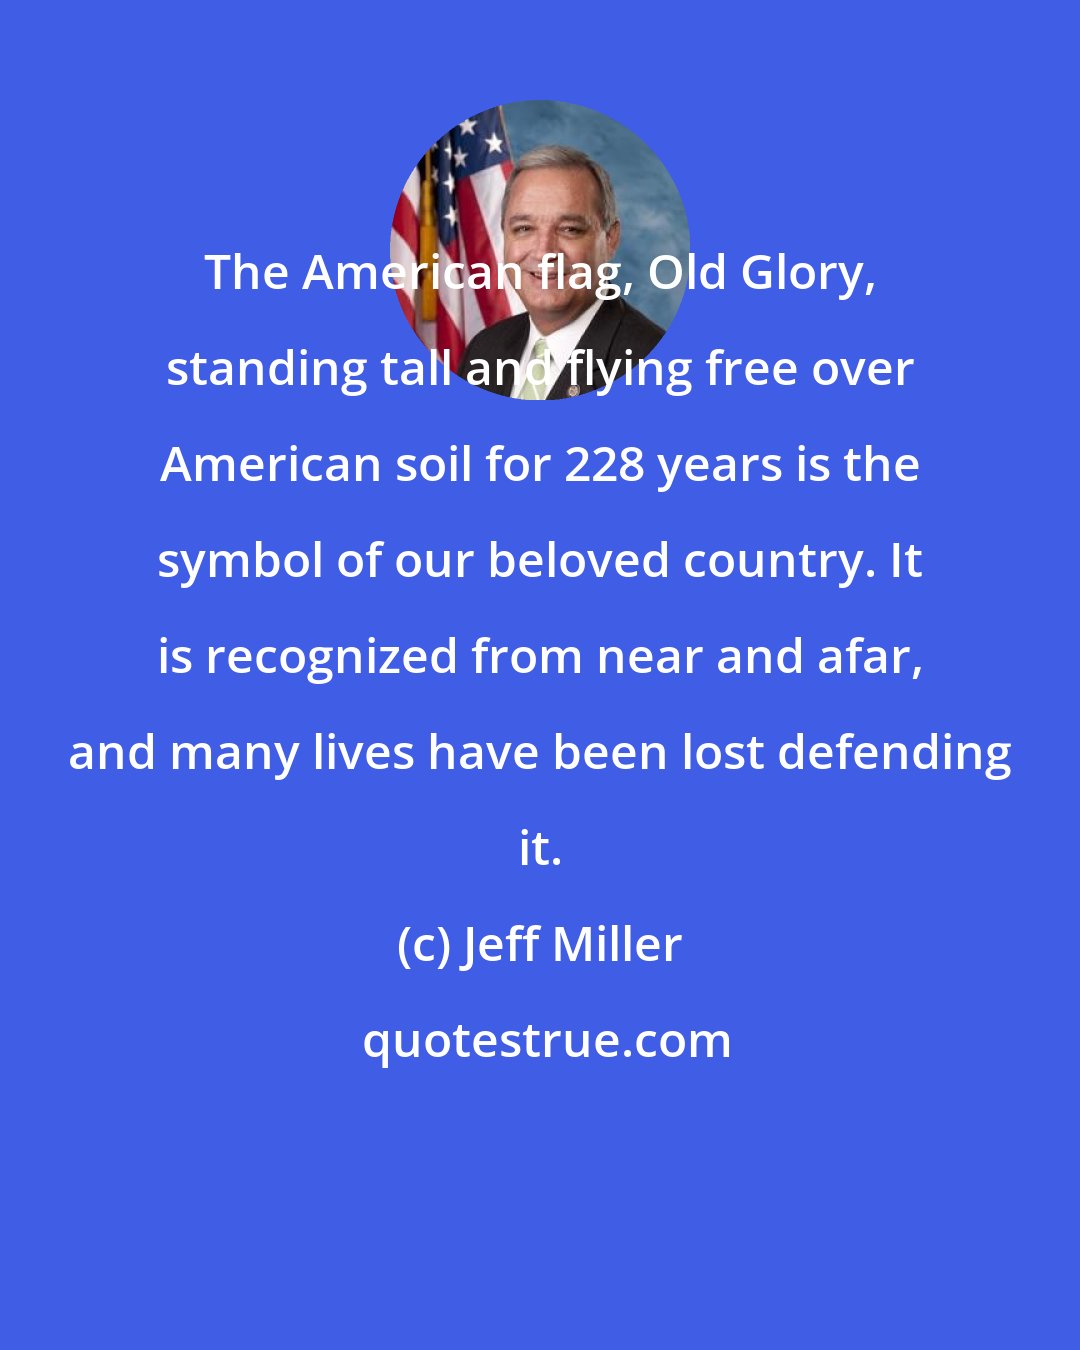 Jeff Miller: The American flag, Old Glory, standing tall and flying free over American soil for 228 years is the symbol of our beloved country. It is recognized from near and afar, and many lives have been lost defending it.